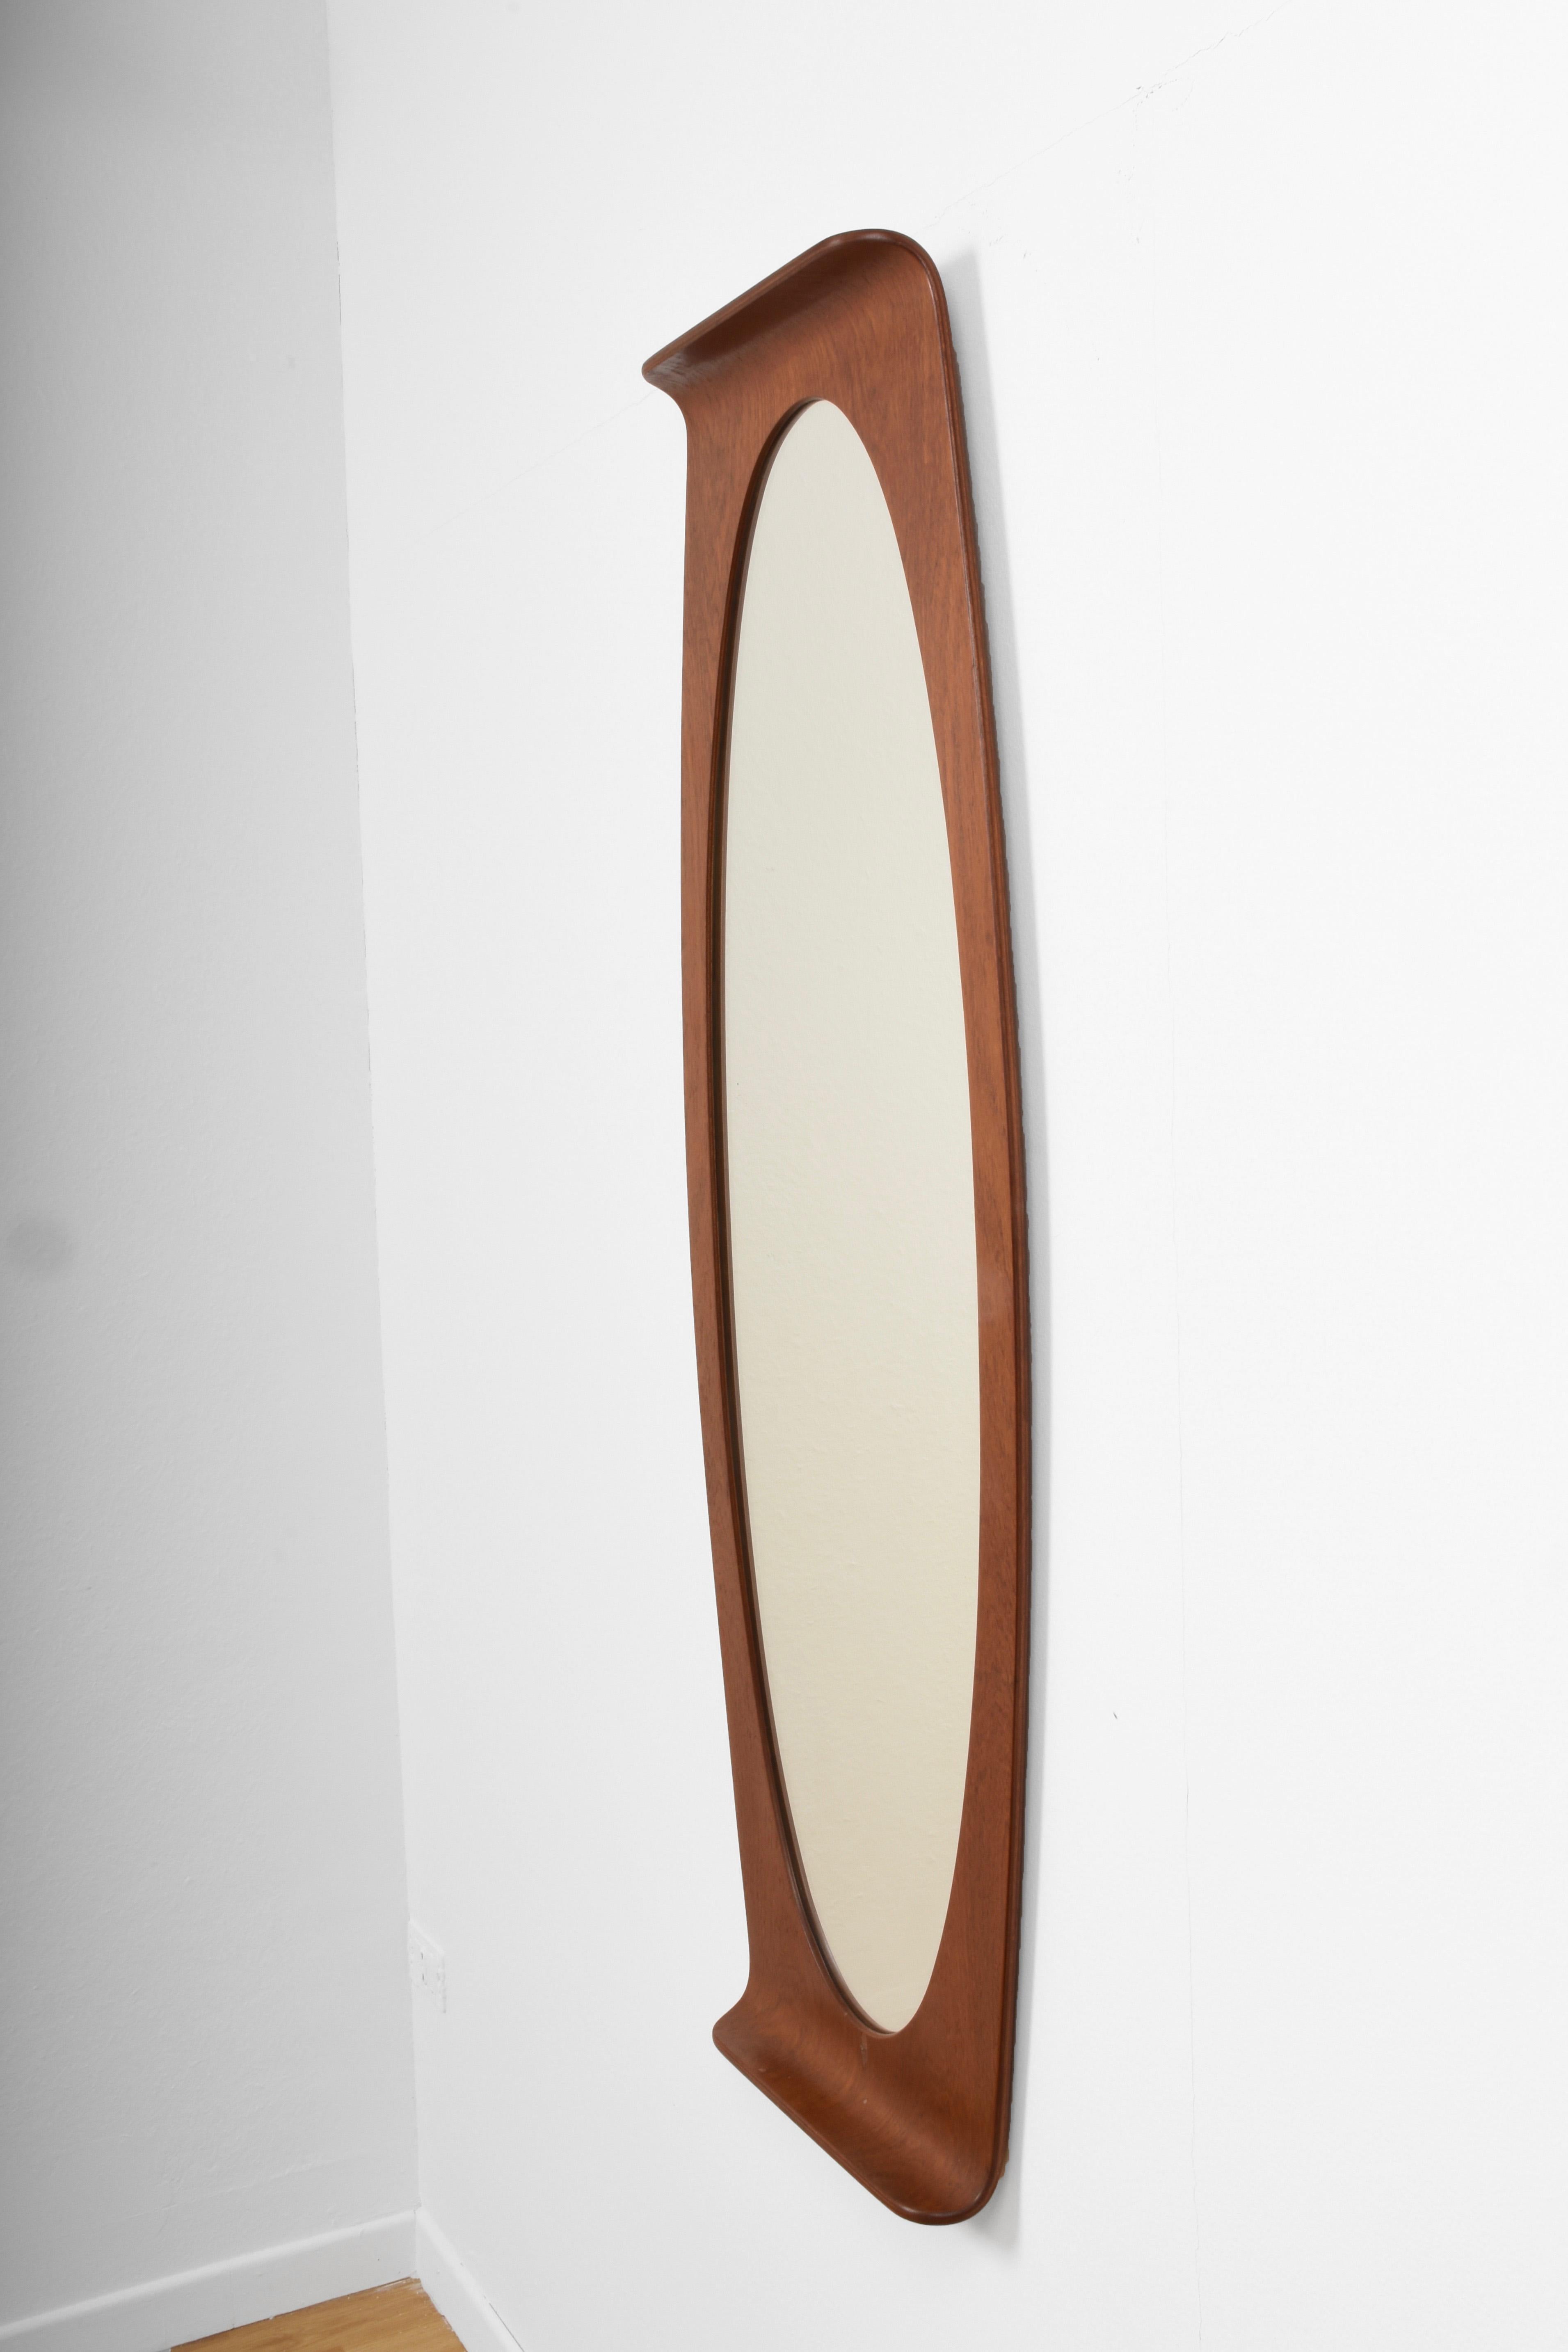 Carved Franco Campo & Carlo Graffi Wall Mirror in Curved Wood, Italy, 1960s